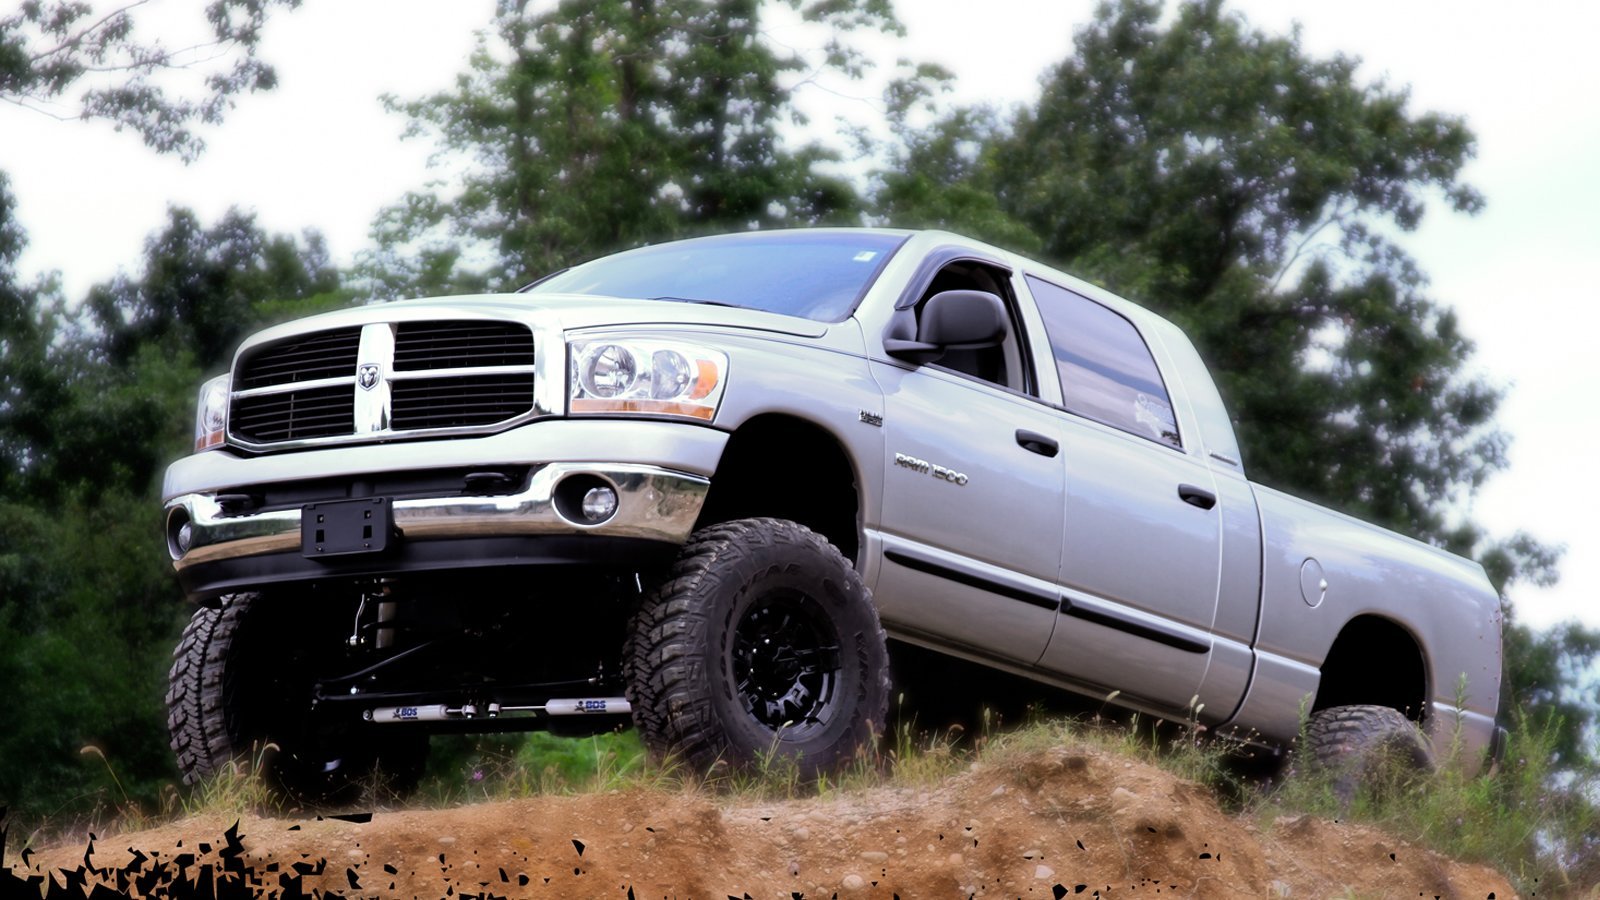 DIY: Common Engine Issues with Third Gen Ram